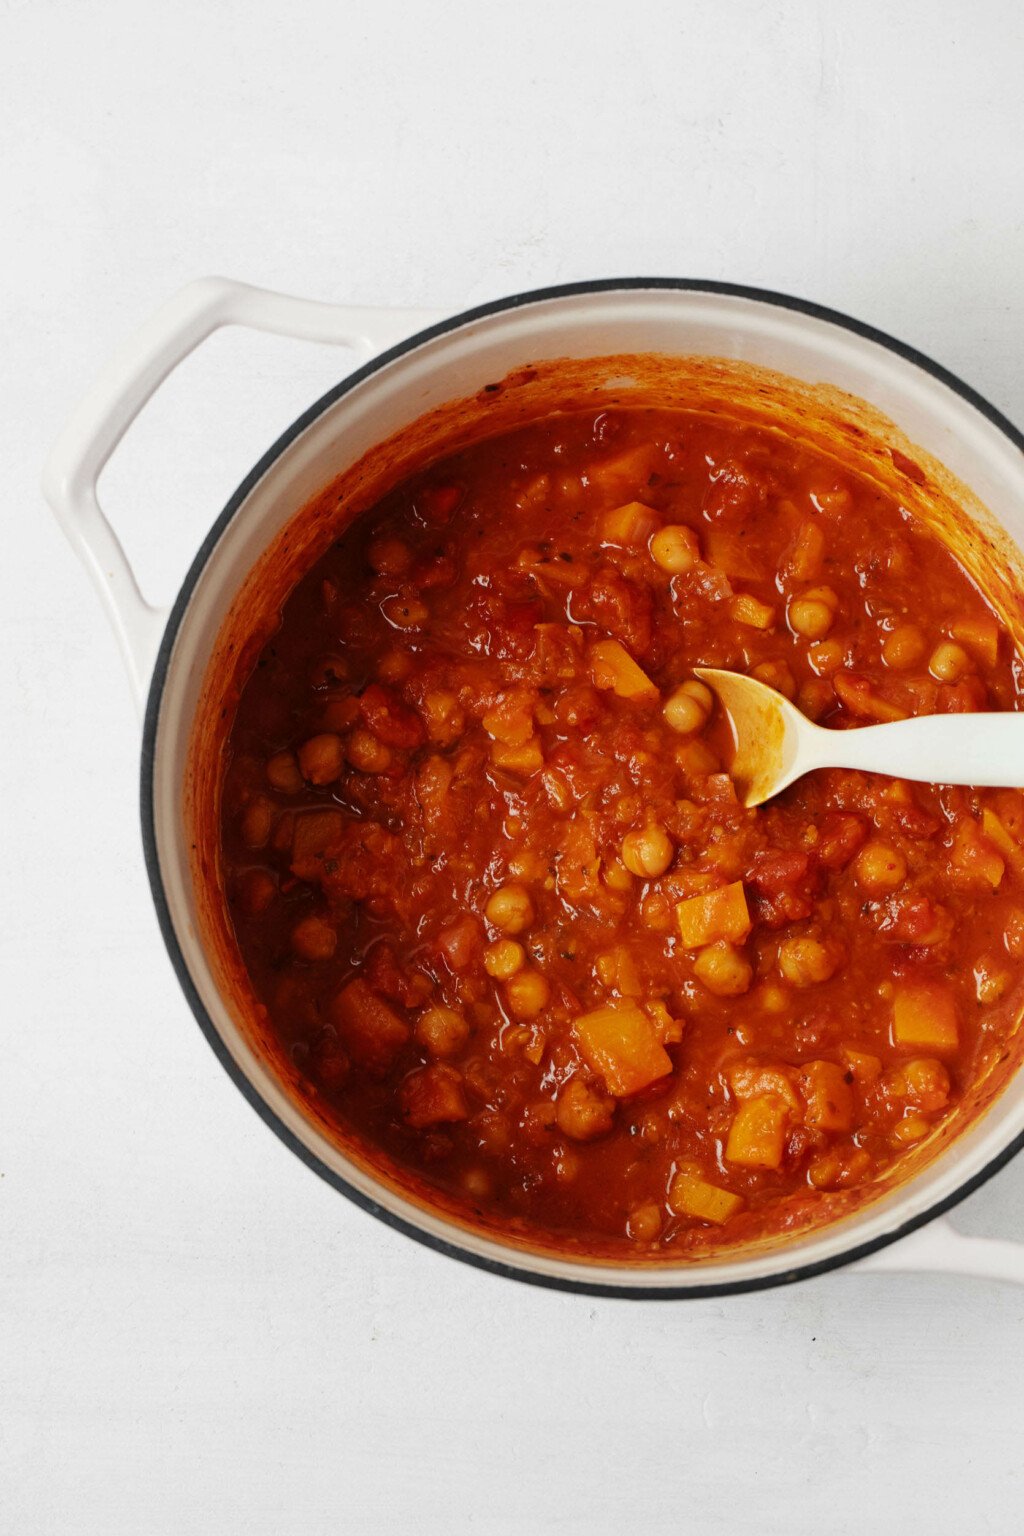 A large, white pot holds a mixture of tomatoes, butternut squash, and chickpeas.